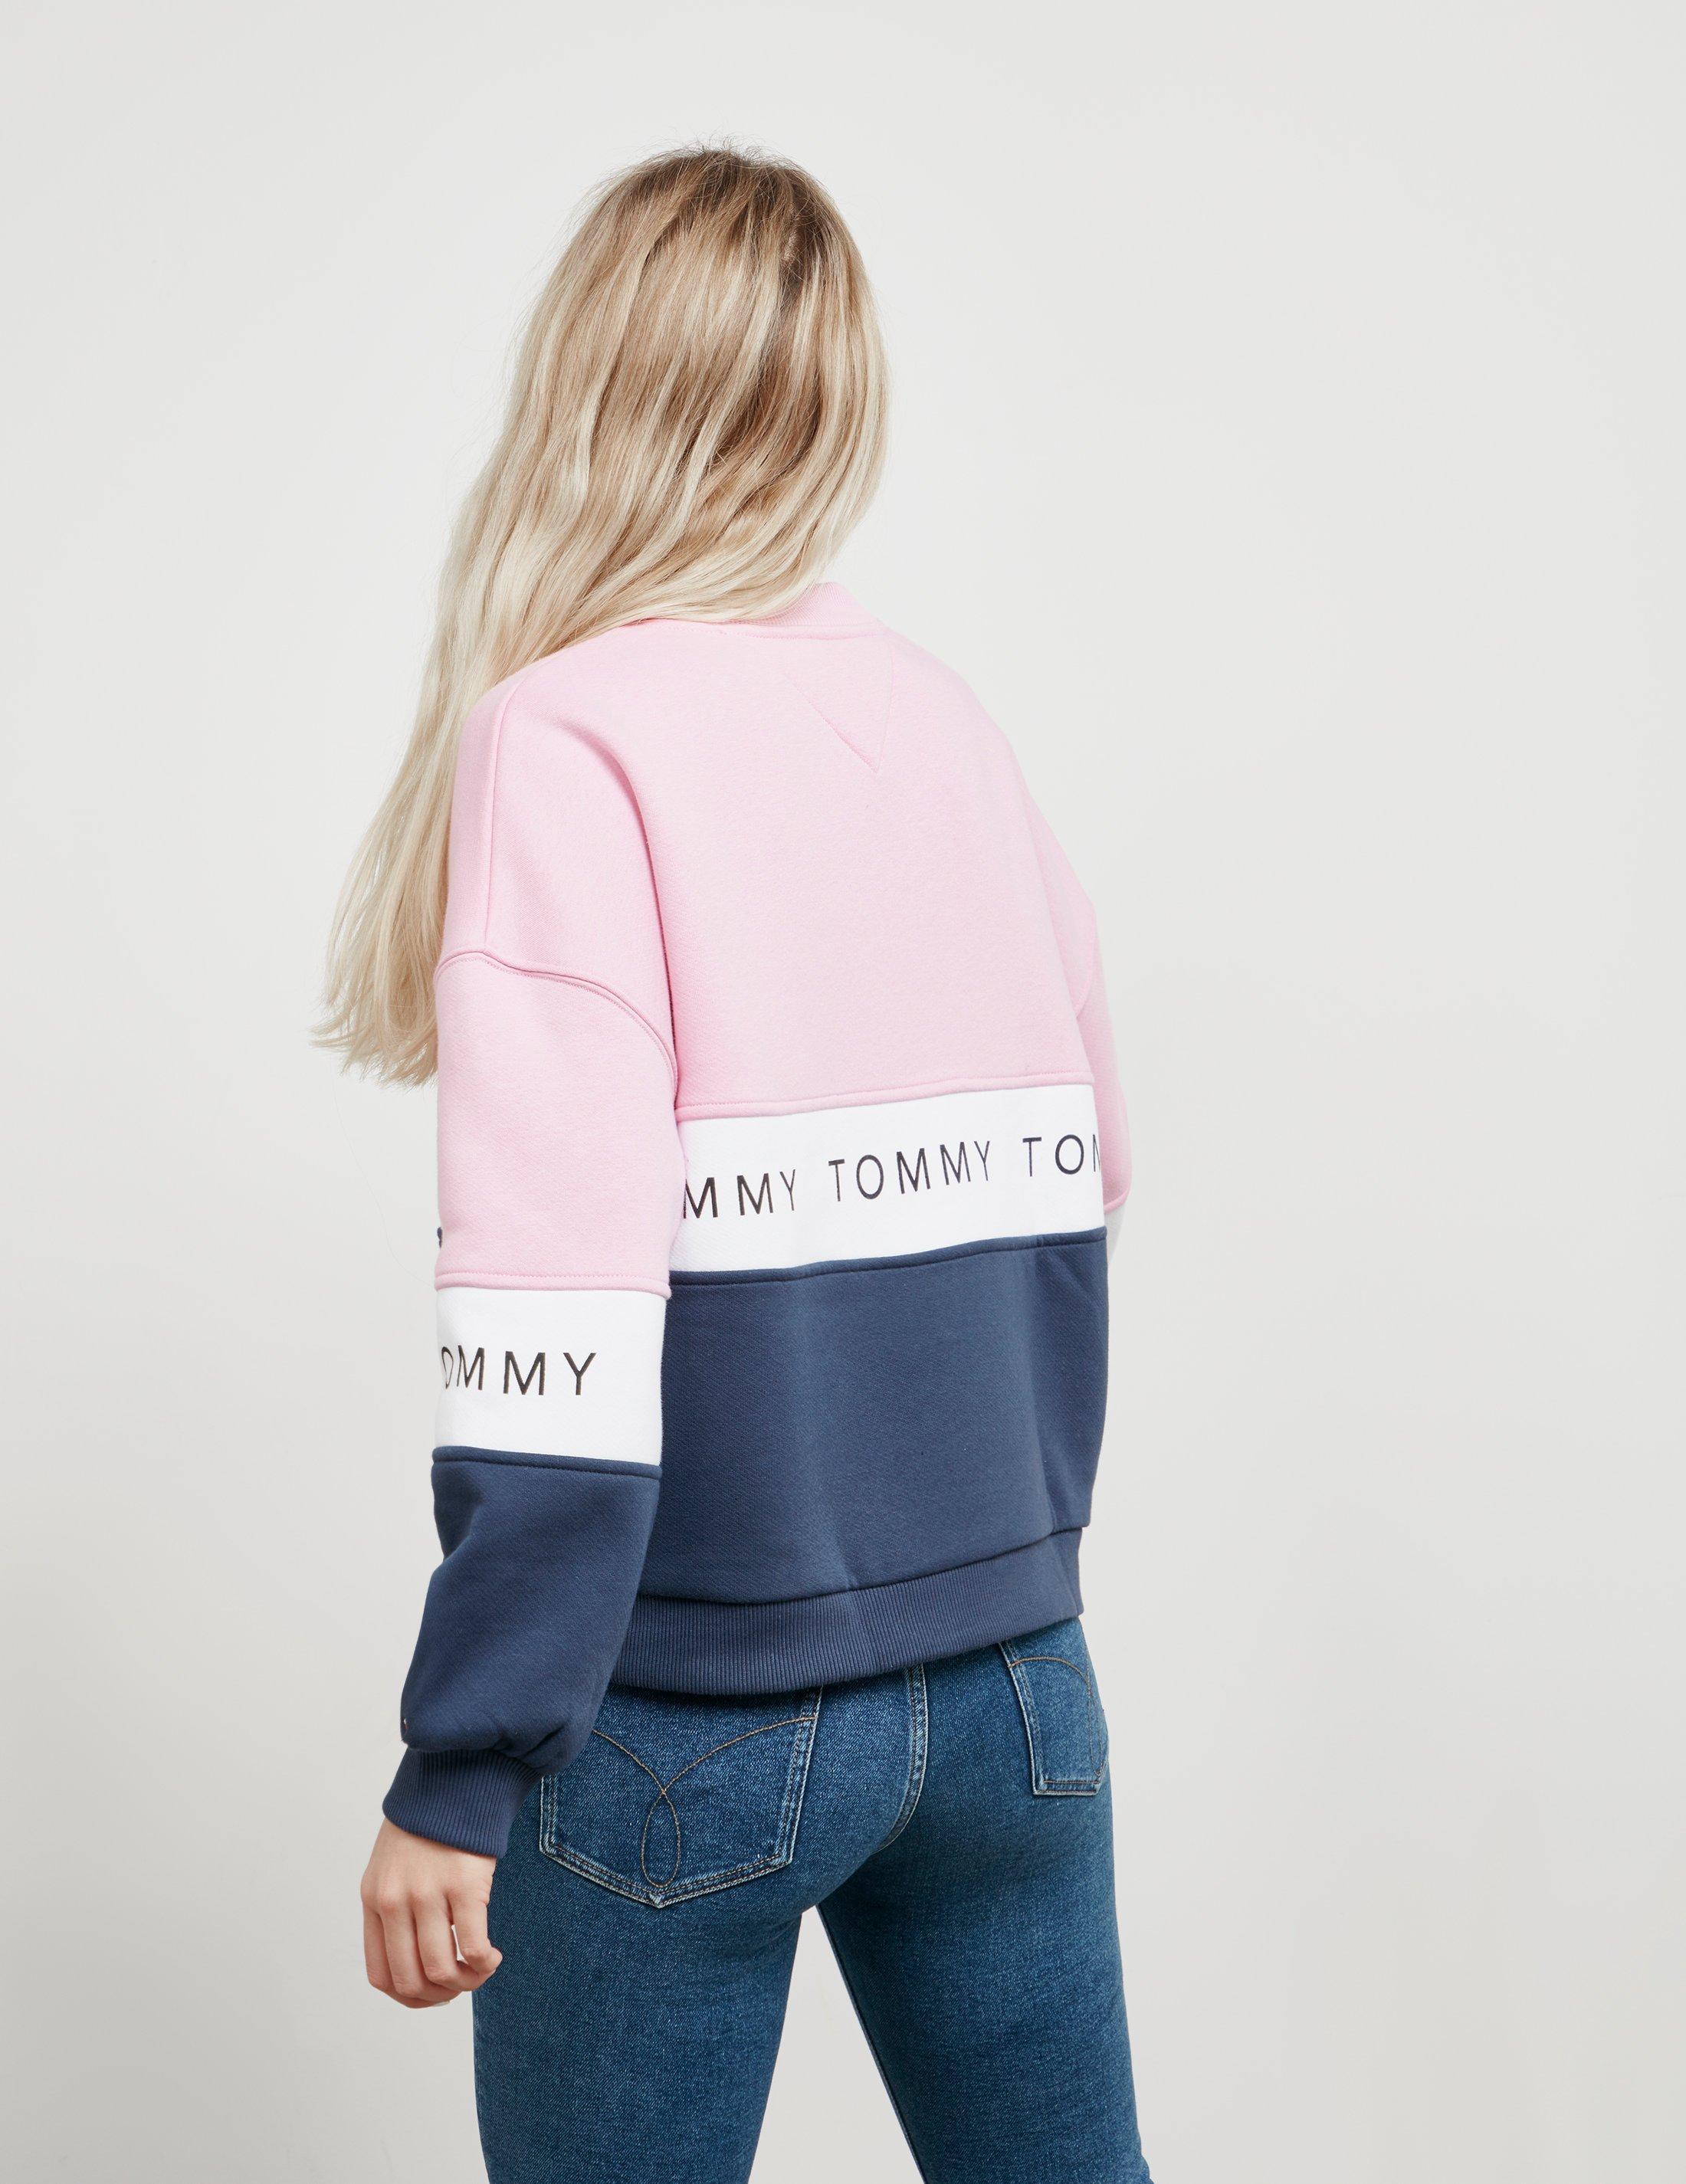 Tommy Hilfiger Women's Pink Sweatshirt Italy, SAVE 59% - icarus.photos